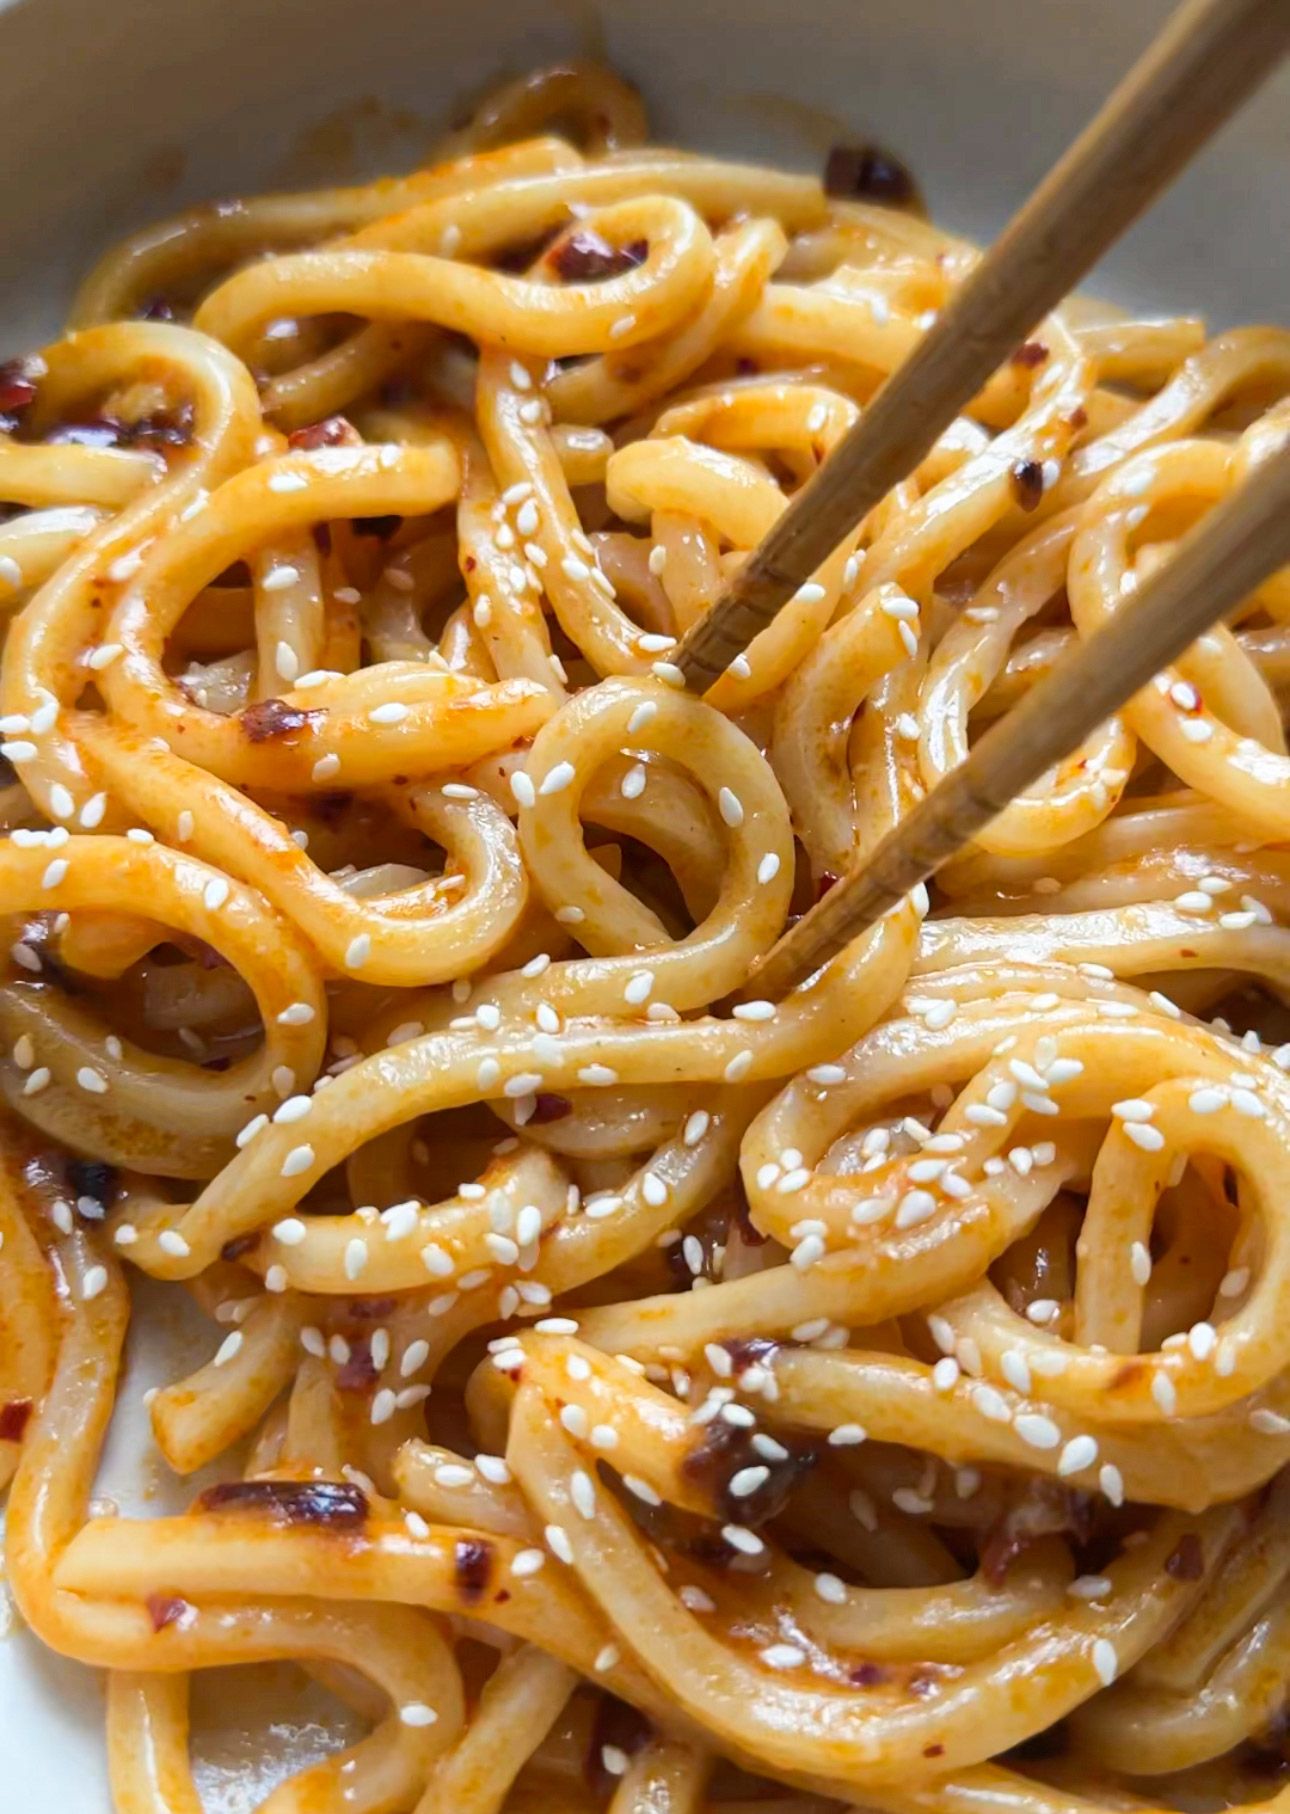 Bowl of noodles with sesame seeds and chopsticks